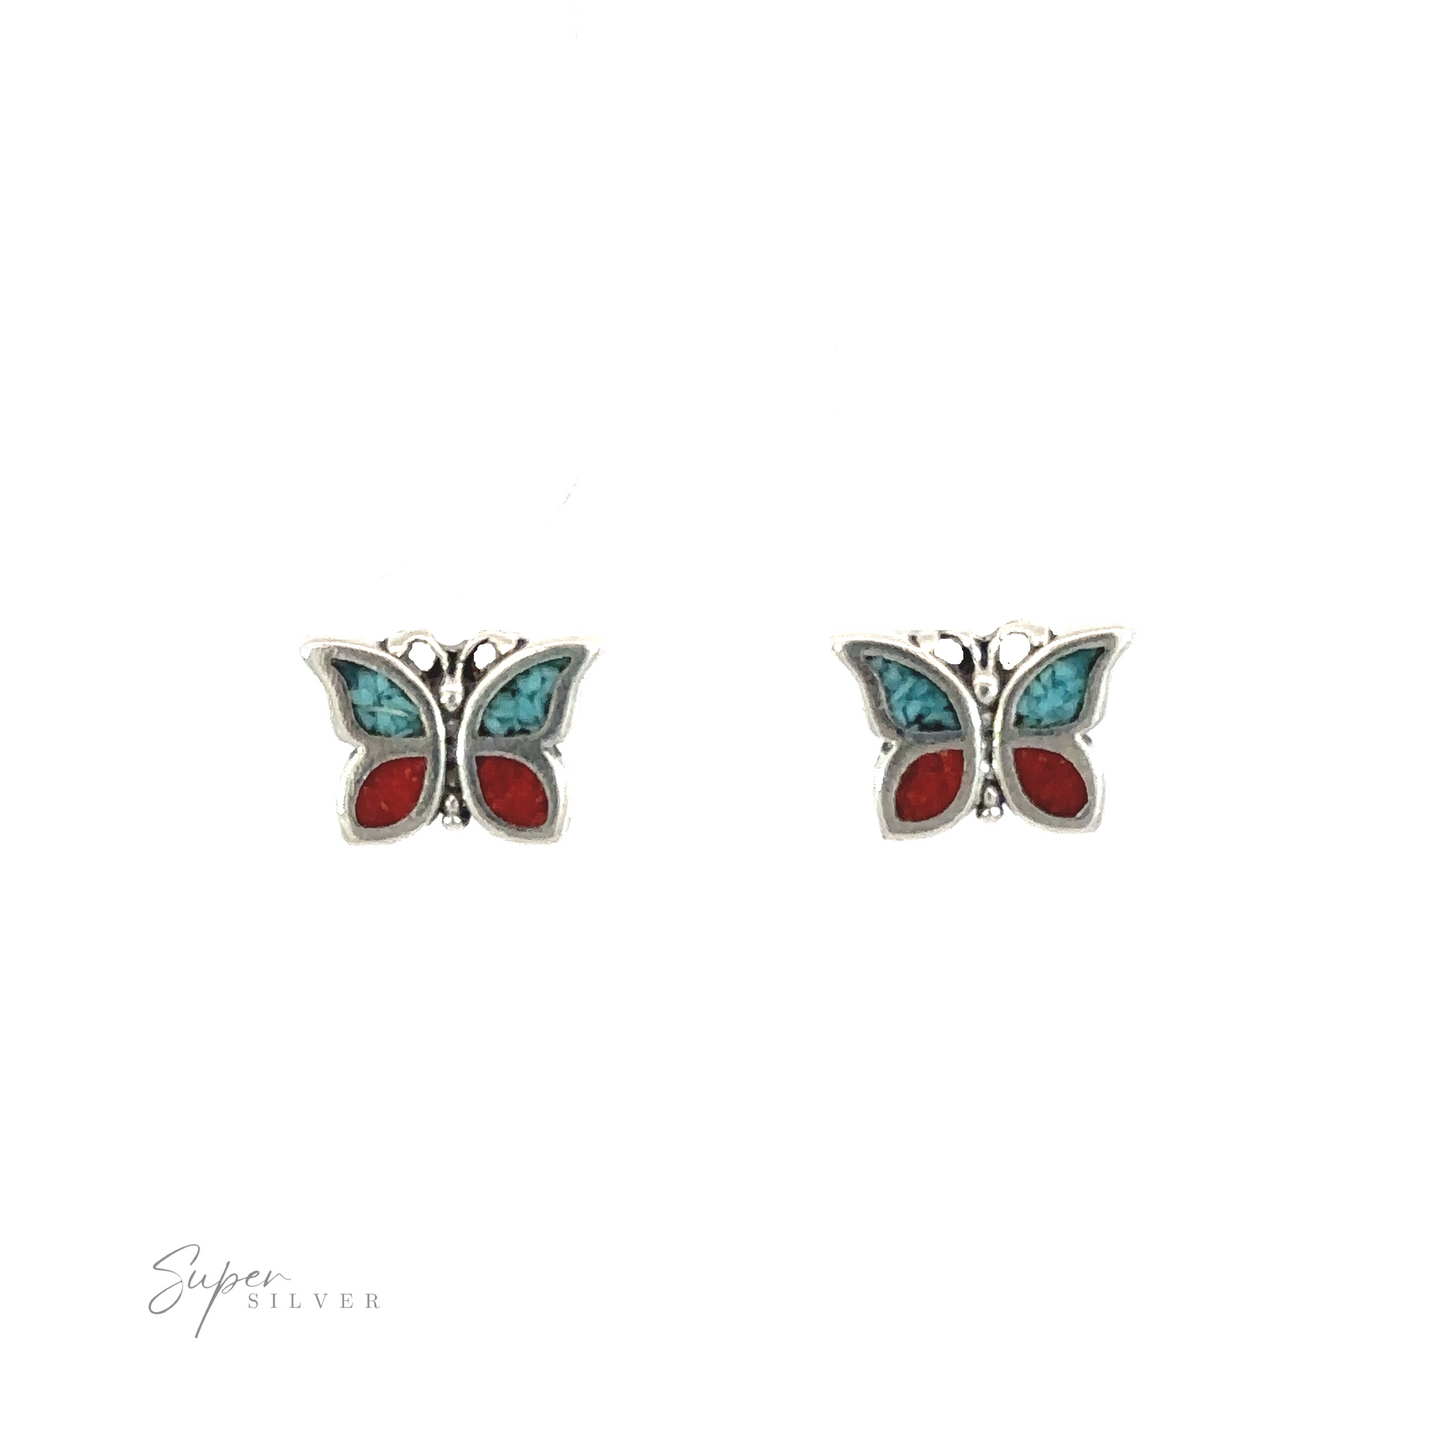 A pair of Coral and Turquoise Butterfly Studs with whimsical coral and turquoise stones.